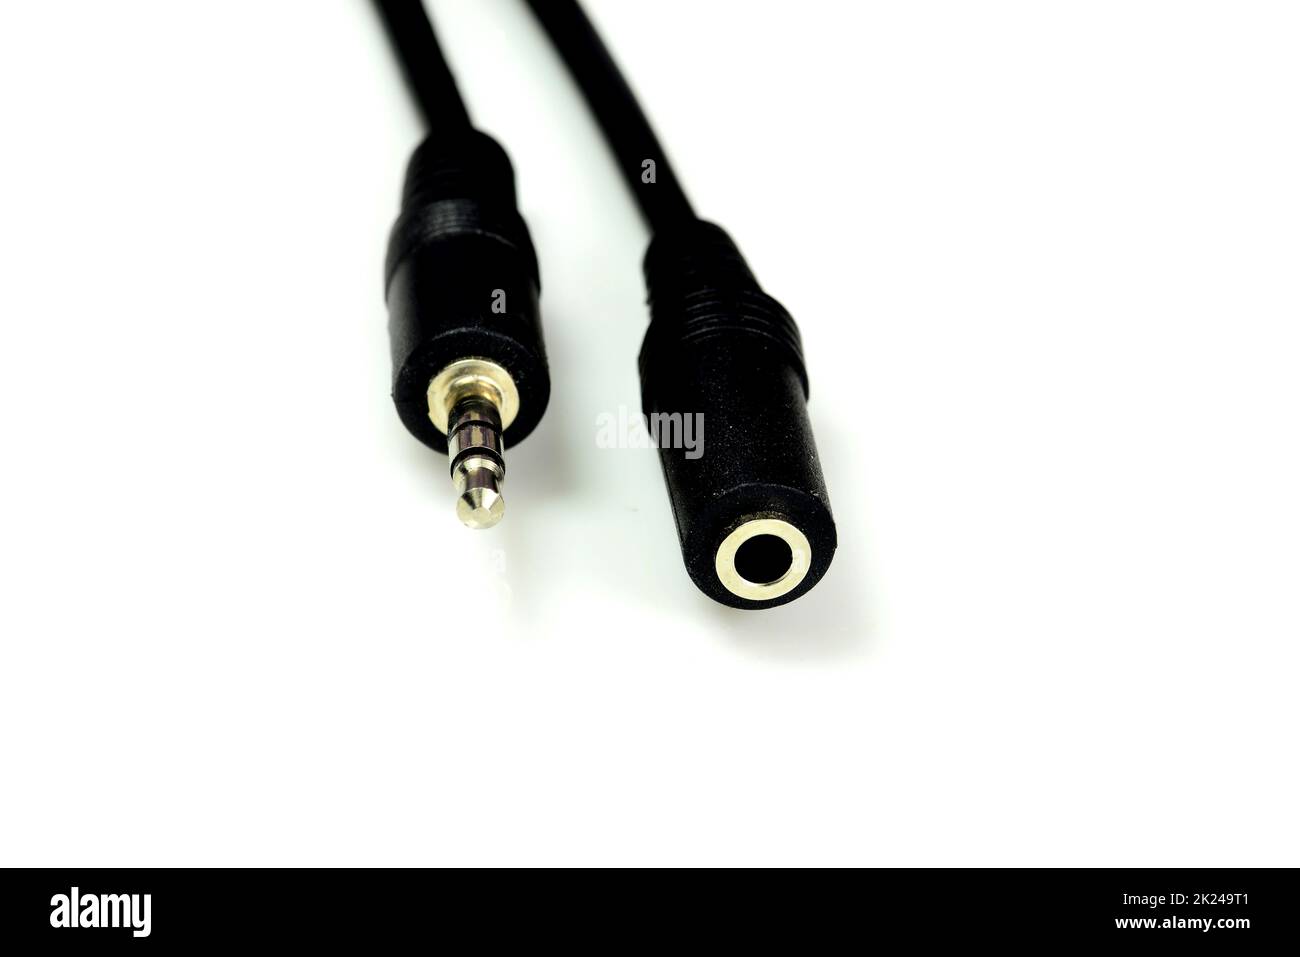 https://c8.alamy.com/comp/2K249T1/phone-jack-in-a-closeup-with-coupling-for-extension-cable-2K249T1.jpg